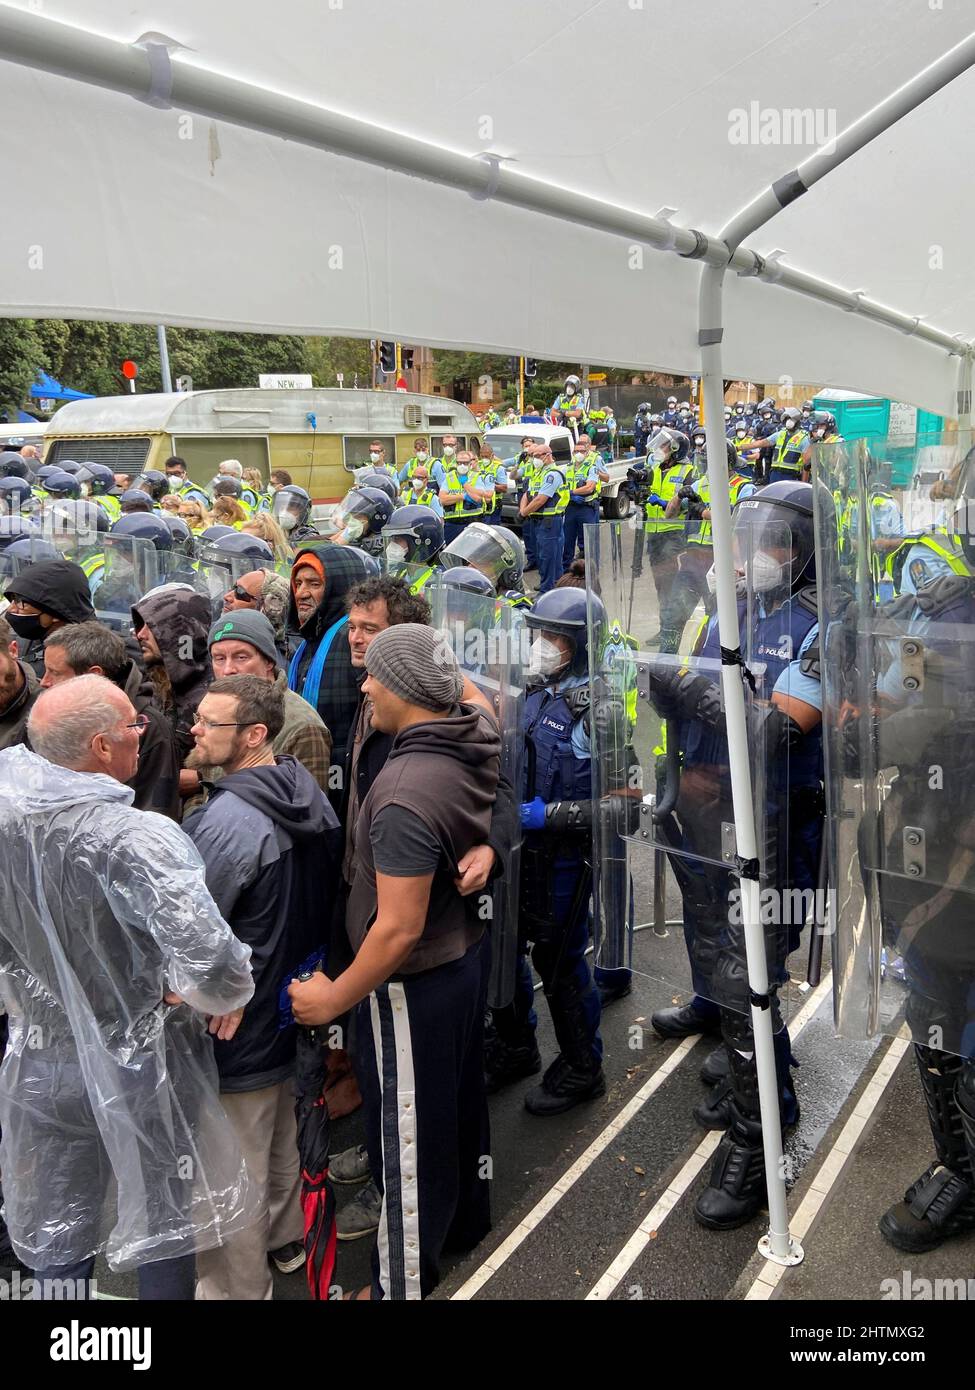 Police stand guard as protesters against the coronavirus disease (COVID-19) restrictions and vaccine mandates gather in front of the parliament in Wellington, New Zealand, March 2, 2022. REUTERS/Praveen Menon Stock Photo